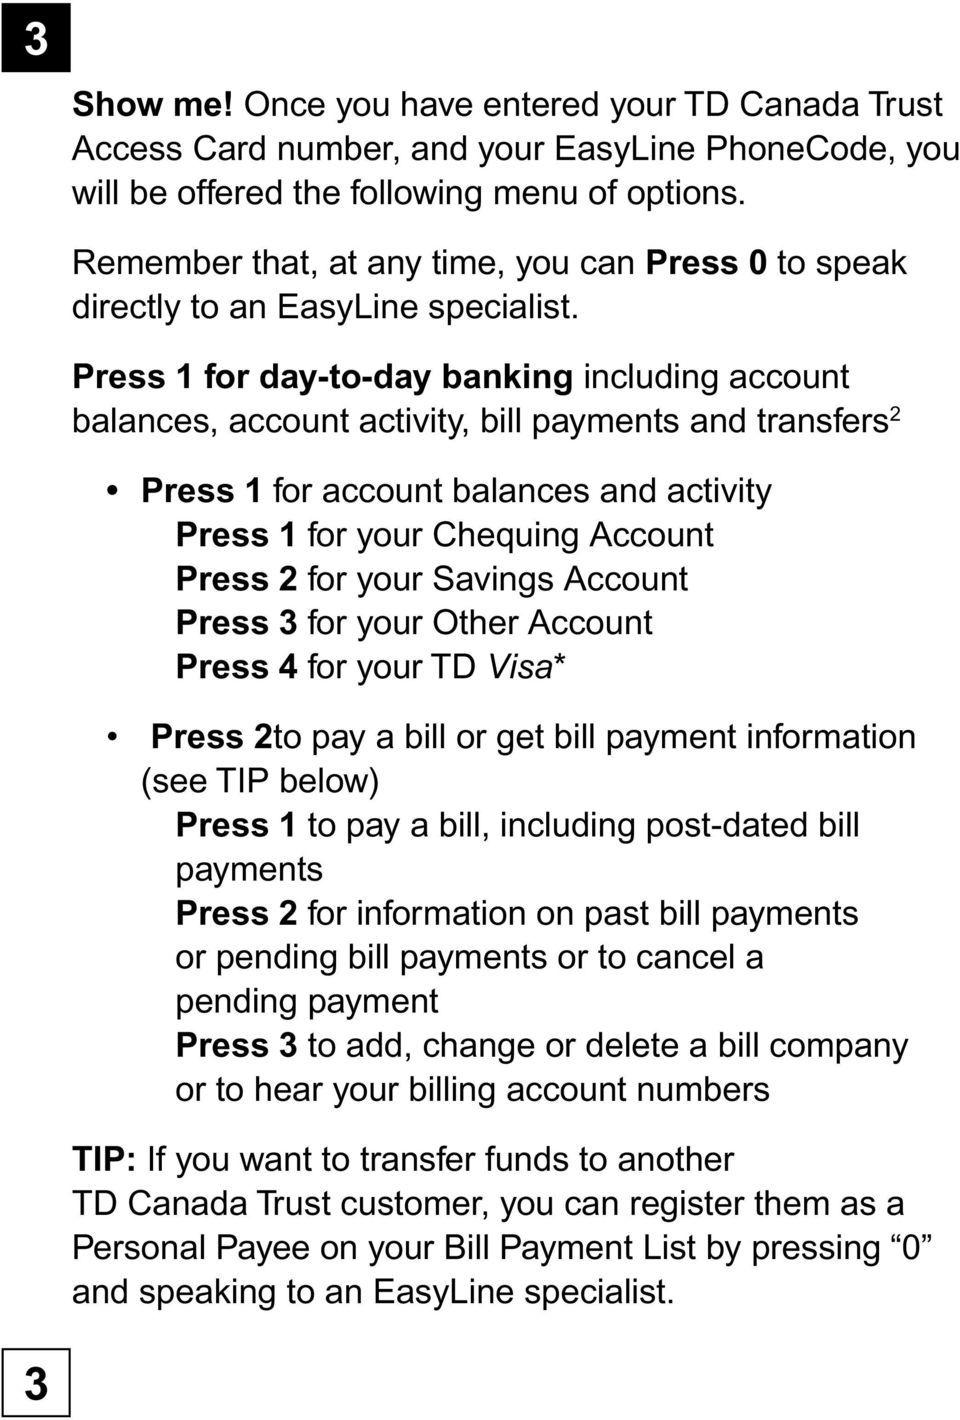 Press for day-to-day banking including account balances, account activity, bill payments and transfers 2 Press for account balances and activity Press for your Chequing Account Press for your Savings